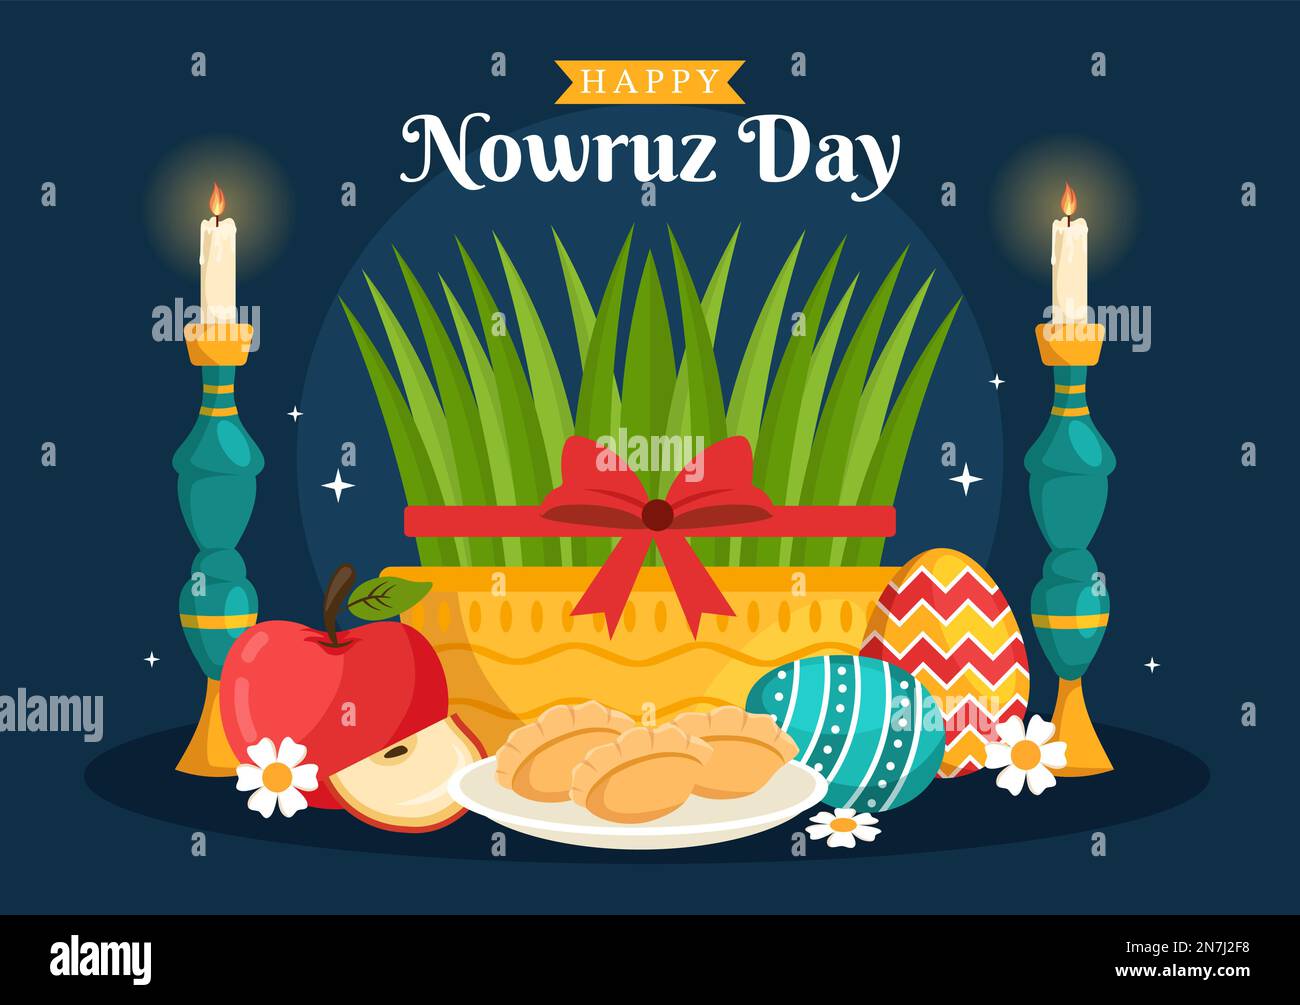 Happy Nowruz Day or Iranian New Year Illustration with Grass Semeni and Fish for Web Banner or Landing Page in Flat Cartoon Hand Drawn Templates Stock Vector